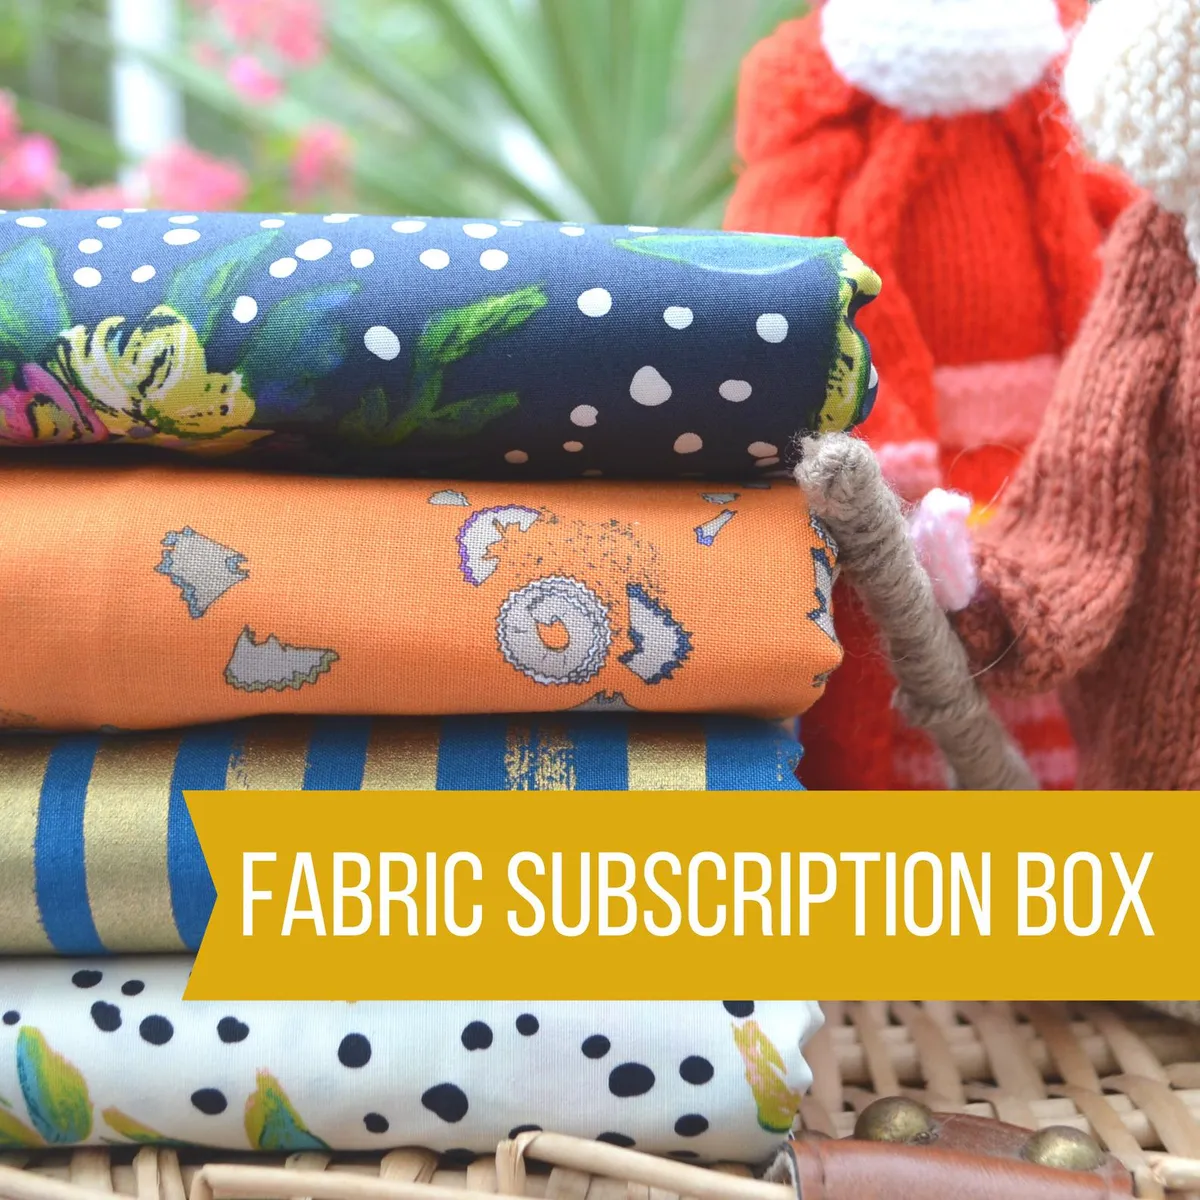 Fabric subscription boxes